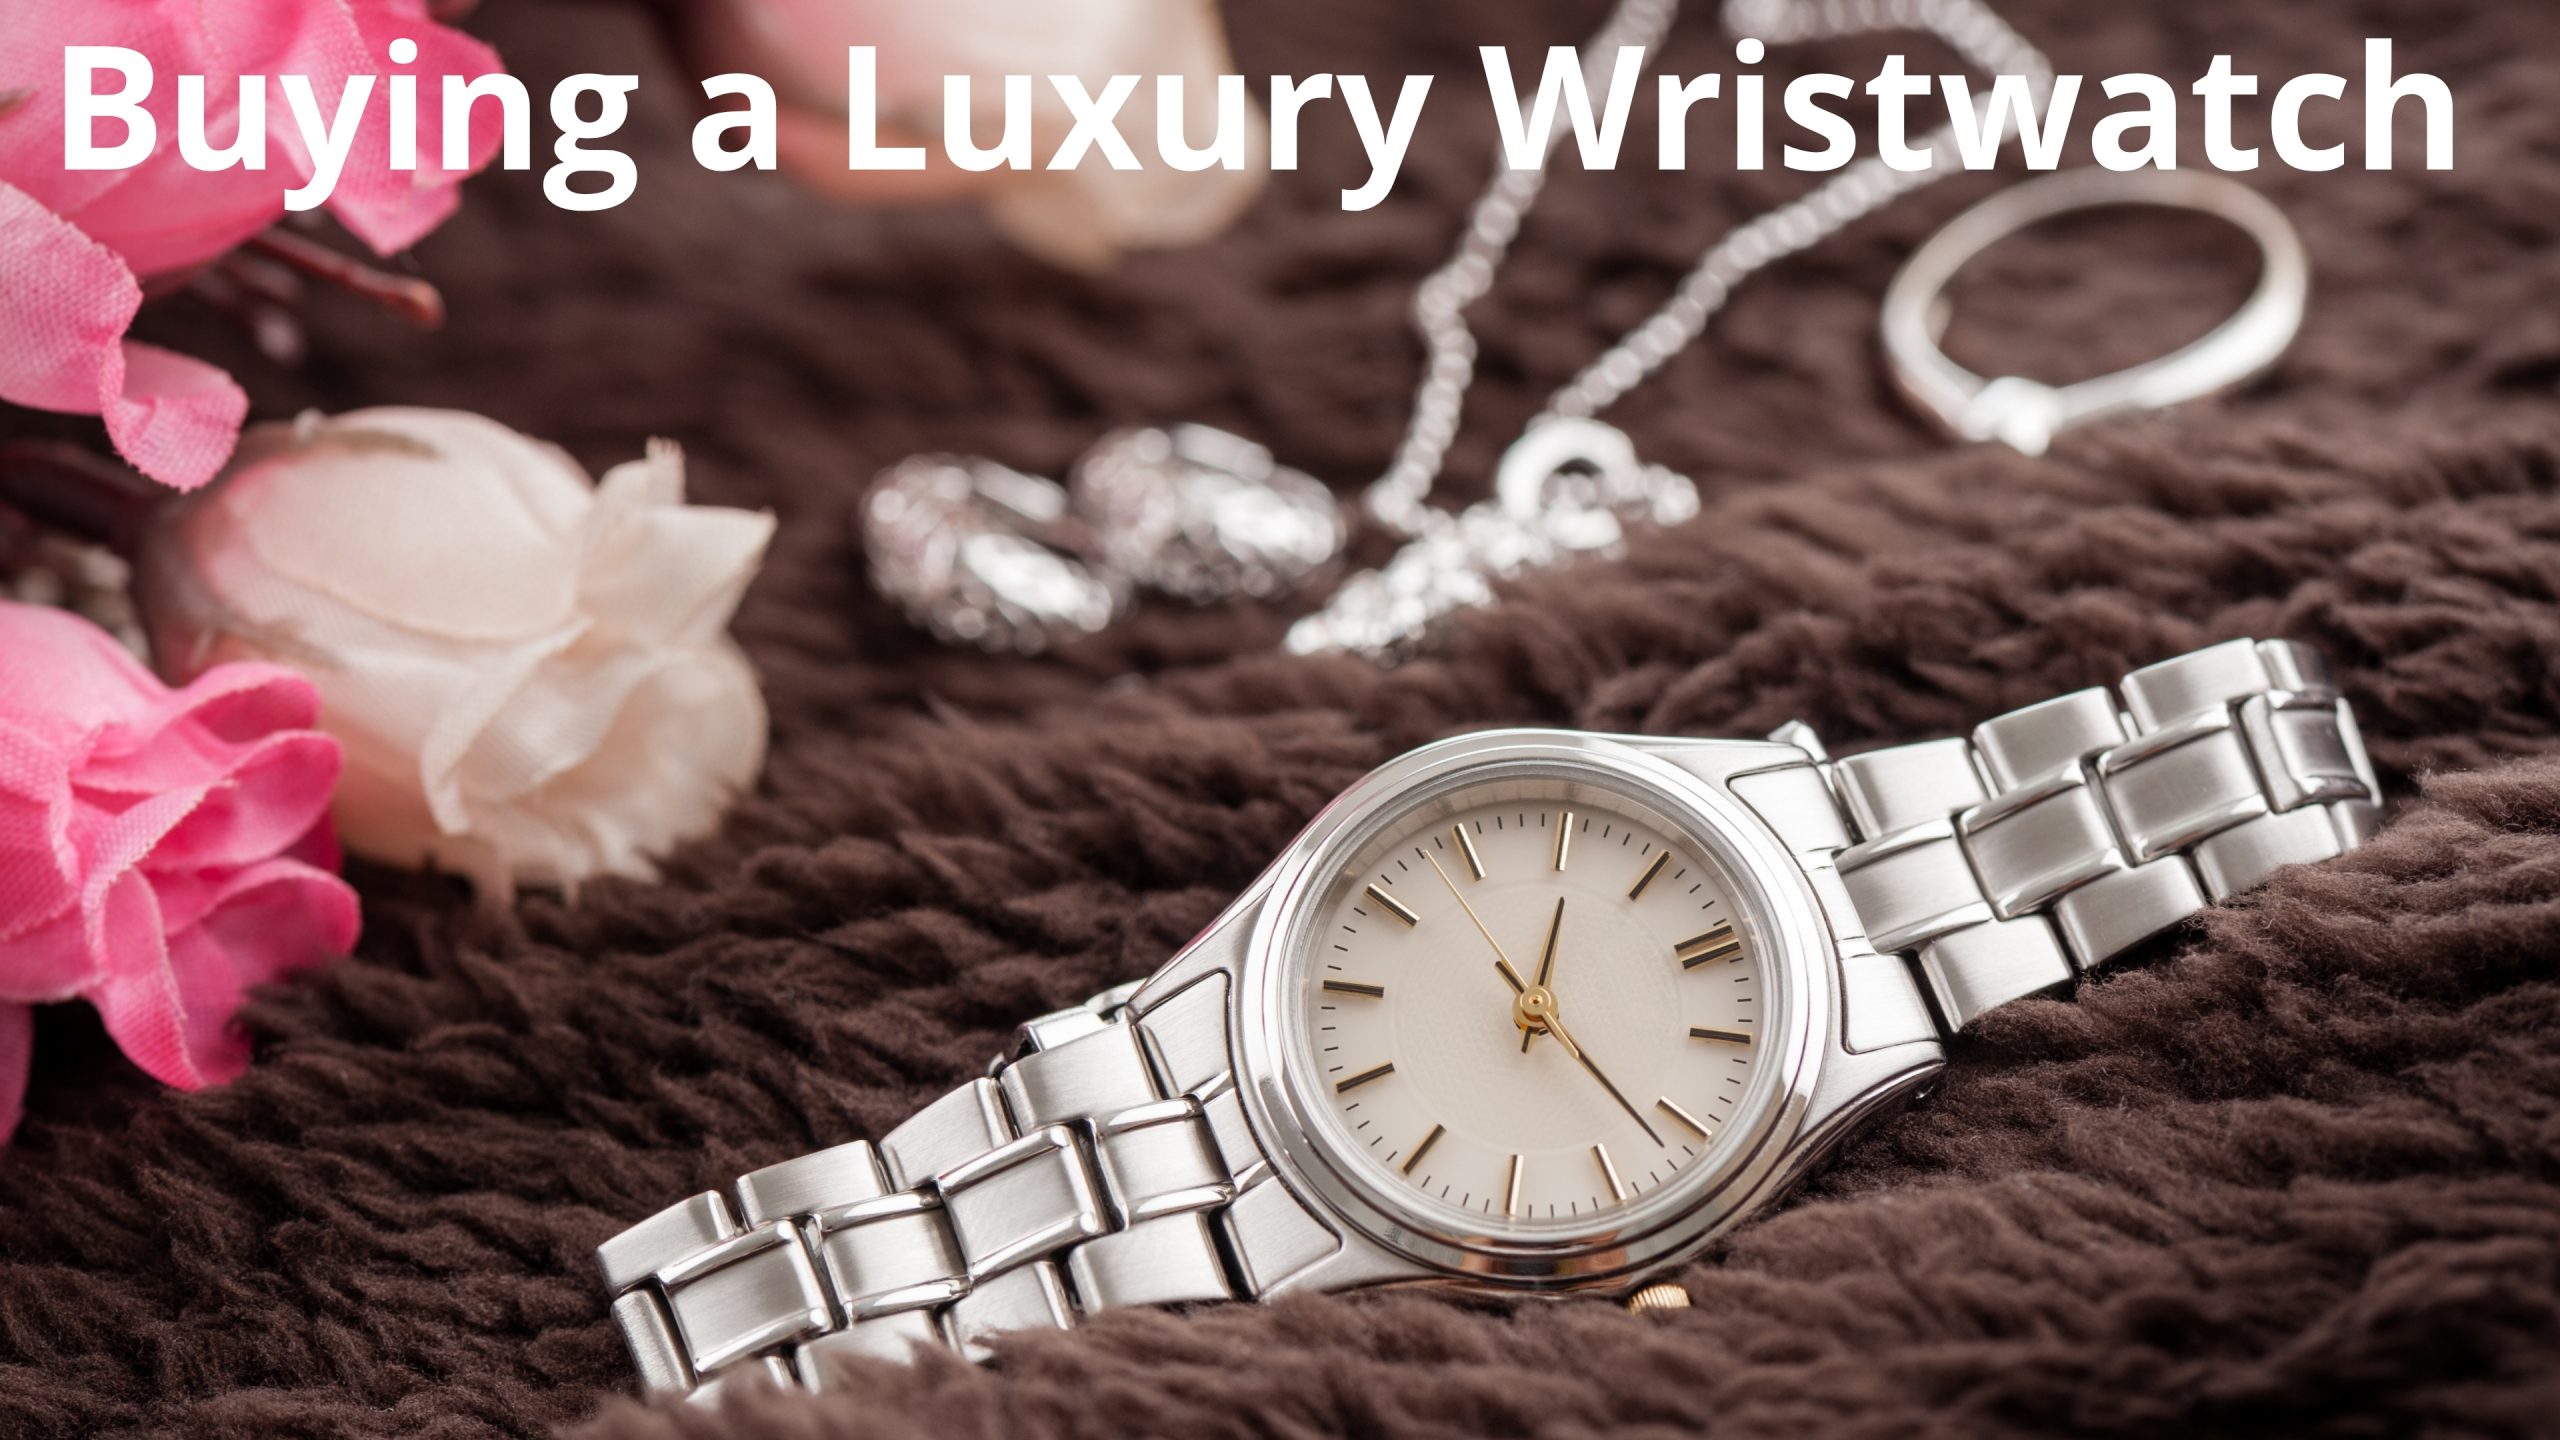 Buying Guide: What You Should Know Before Buying a Luxury Wristwatch